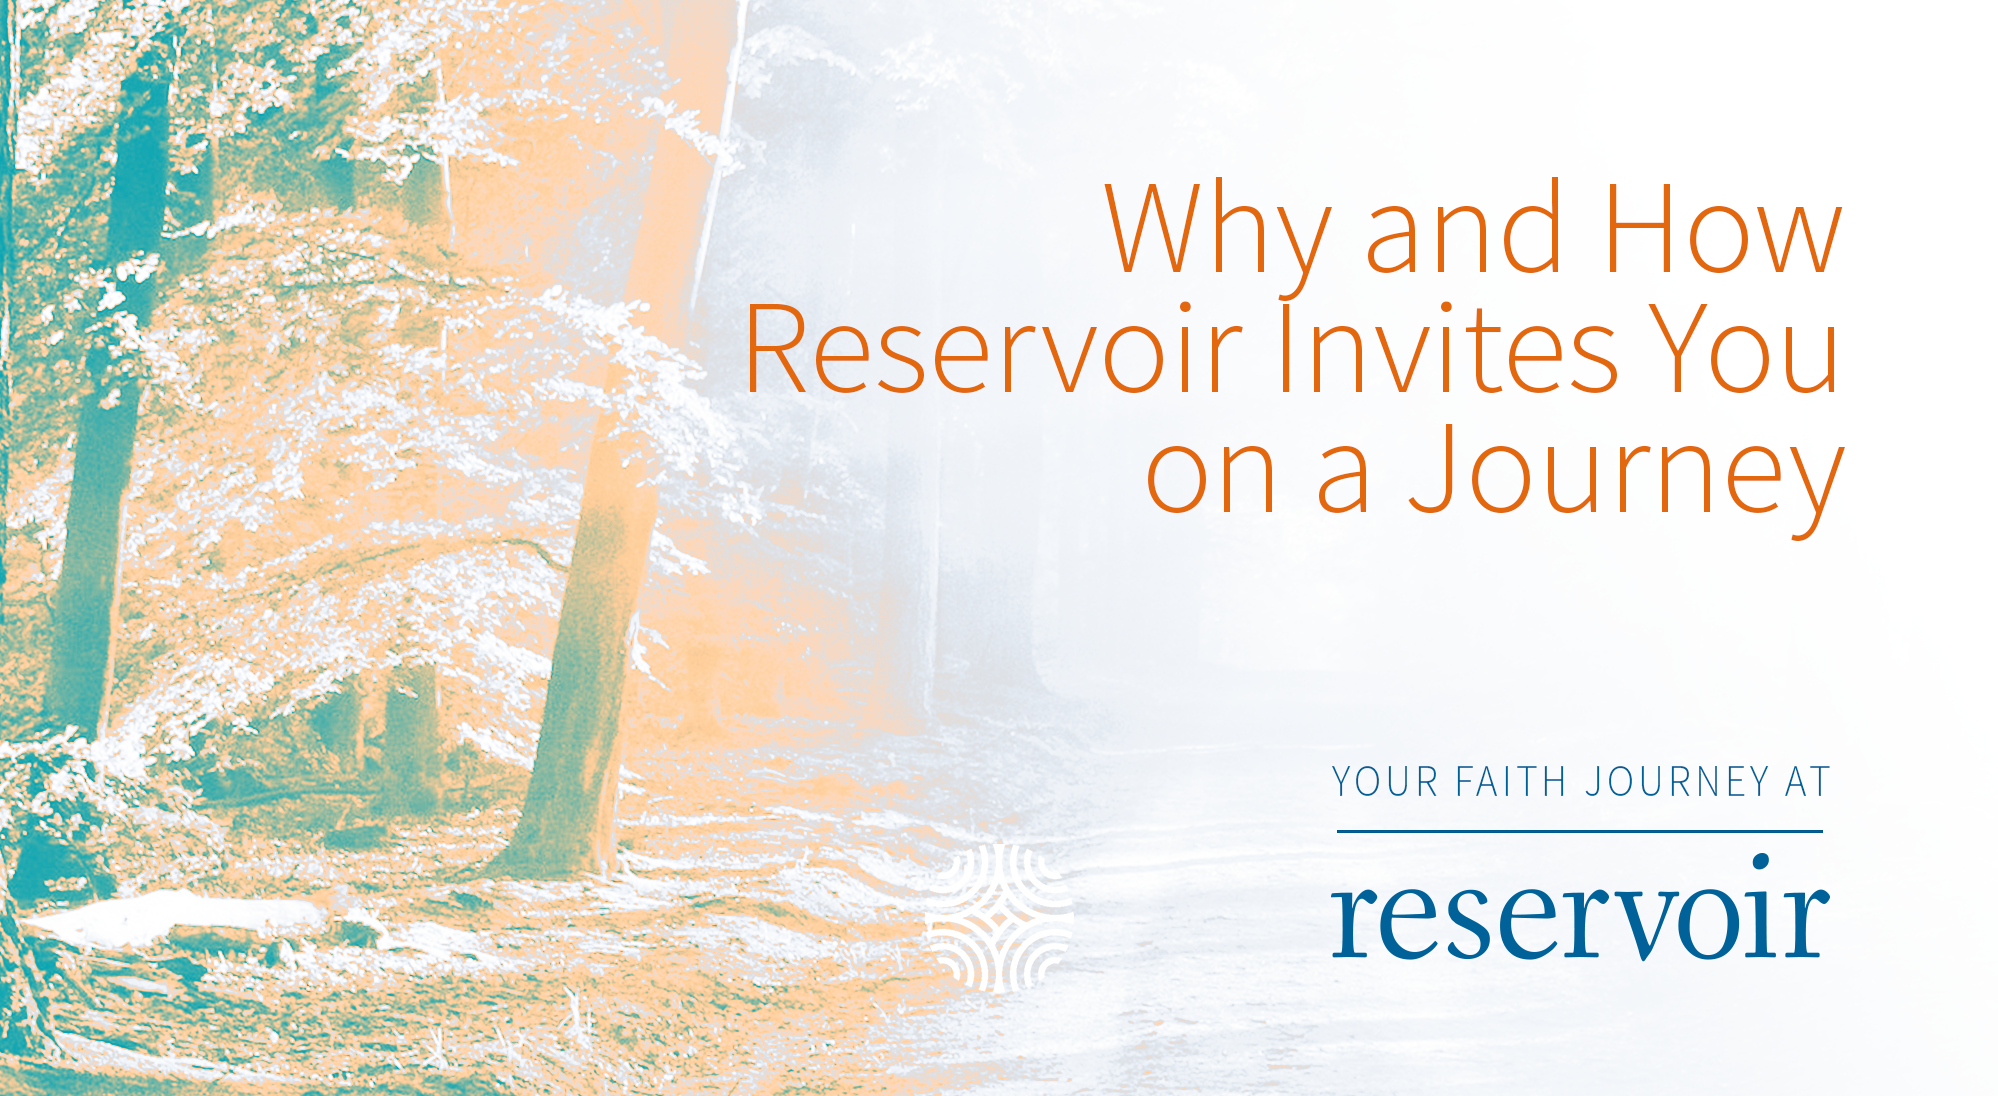 Why and How Reservoir Invites You on A Journey